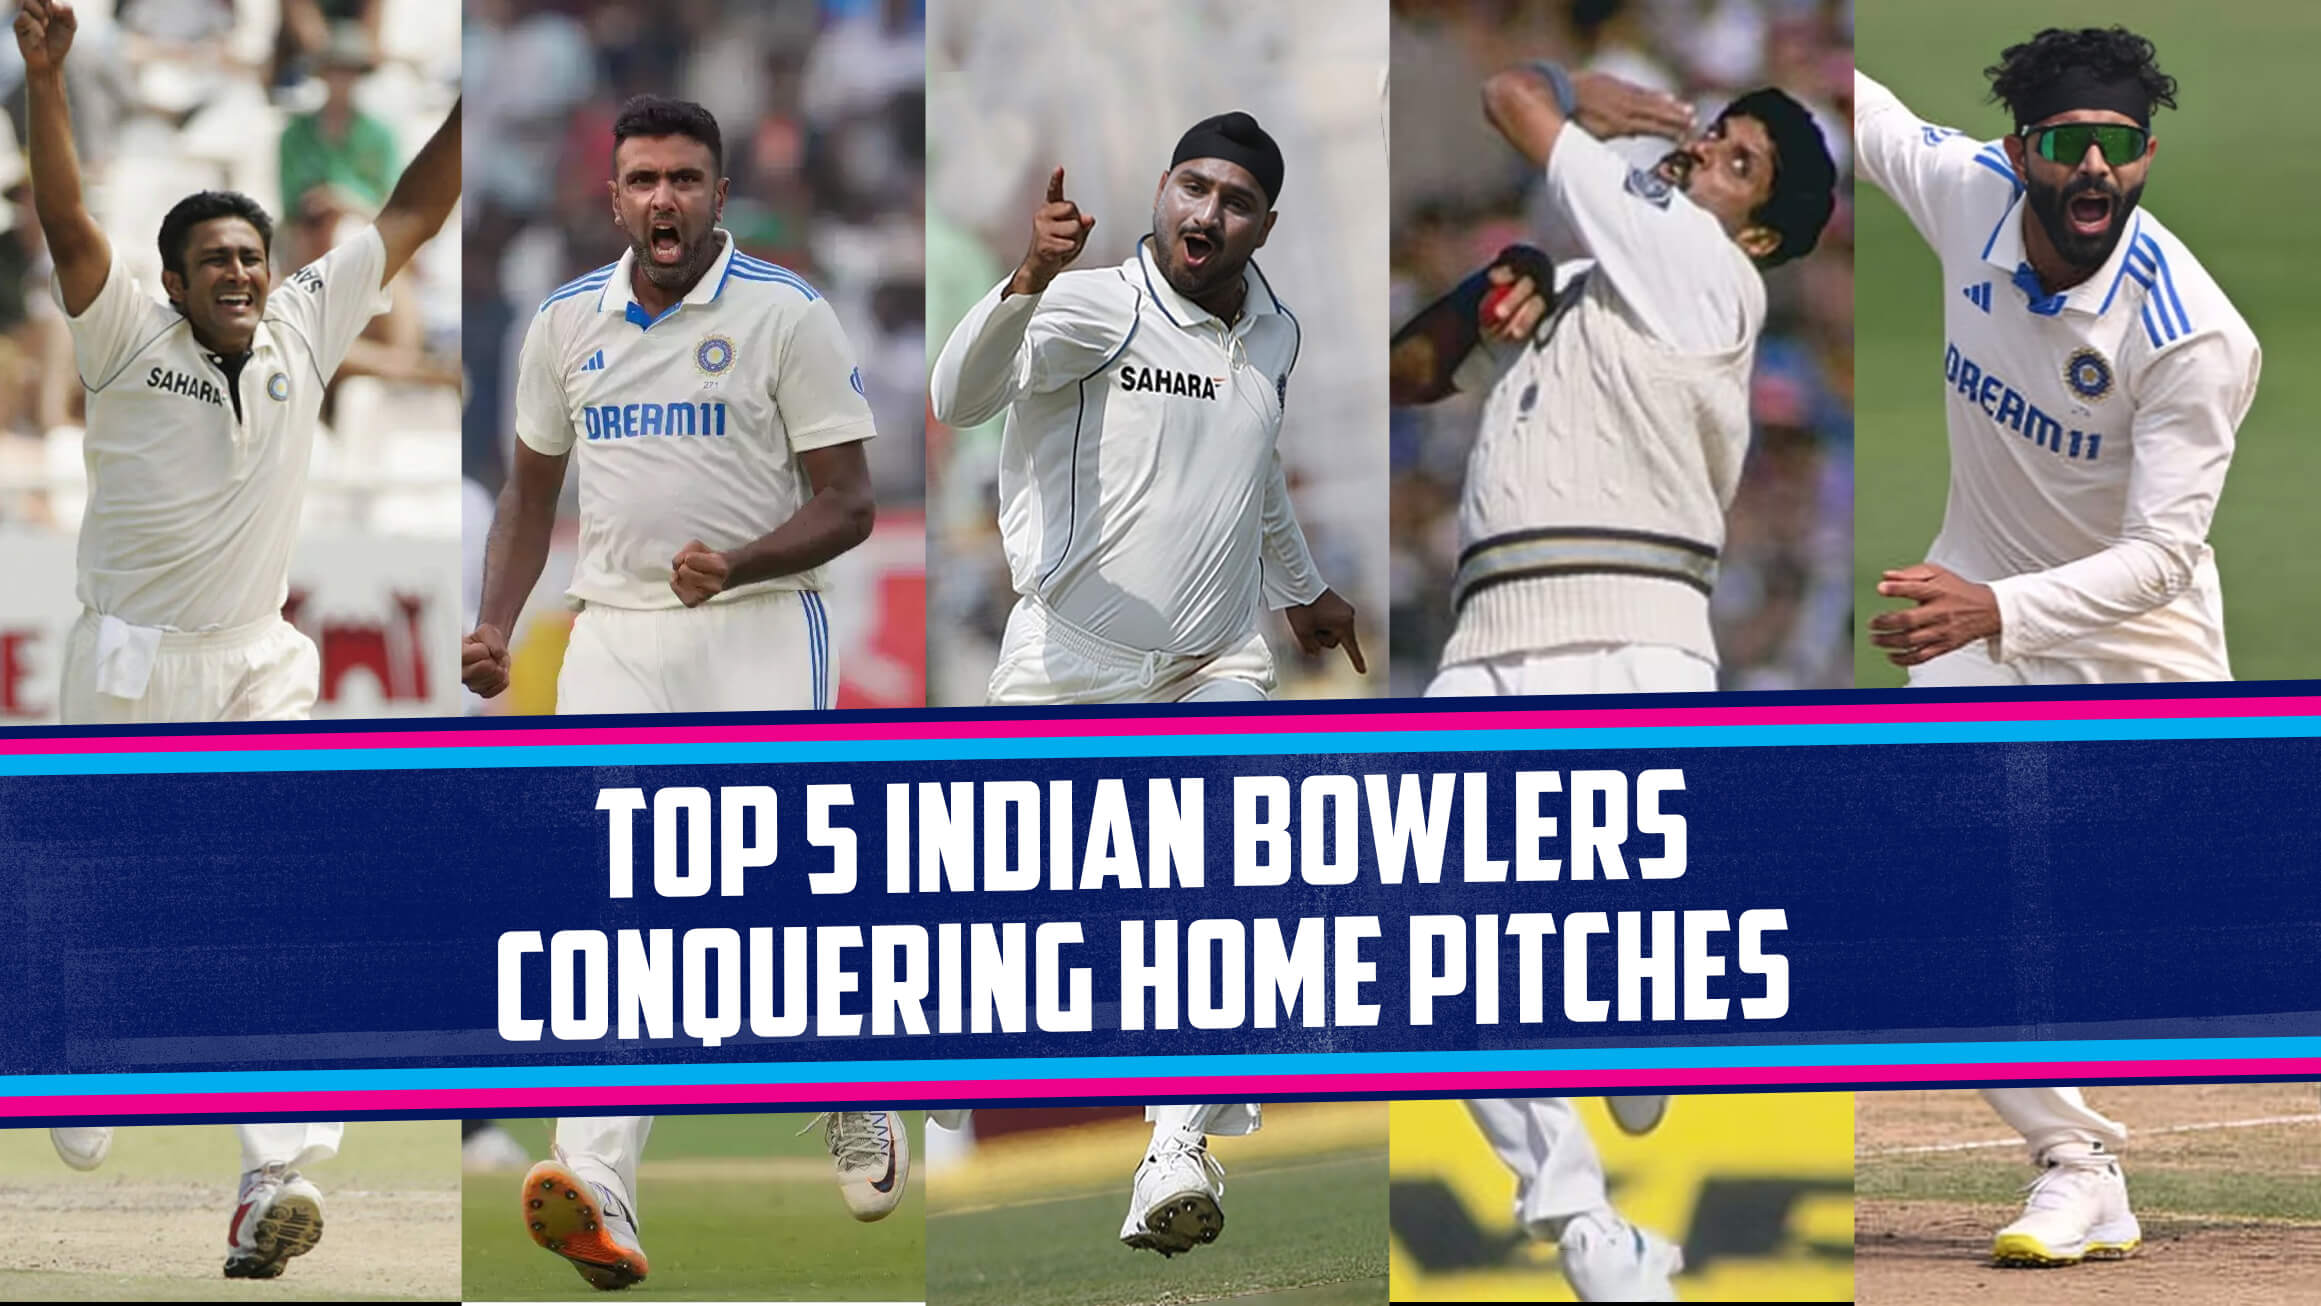 Top 5 Indian bowlers to take most test wickets at home